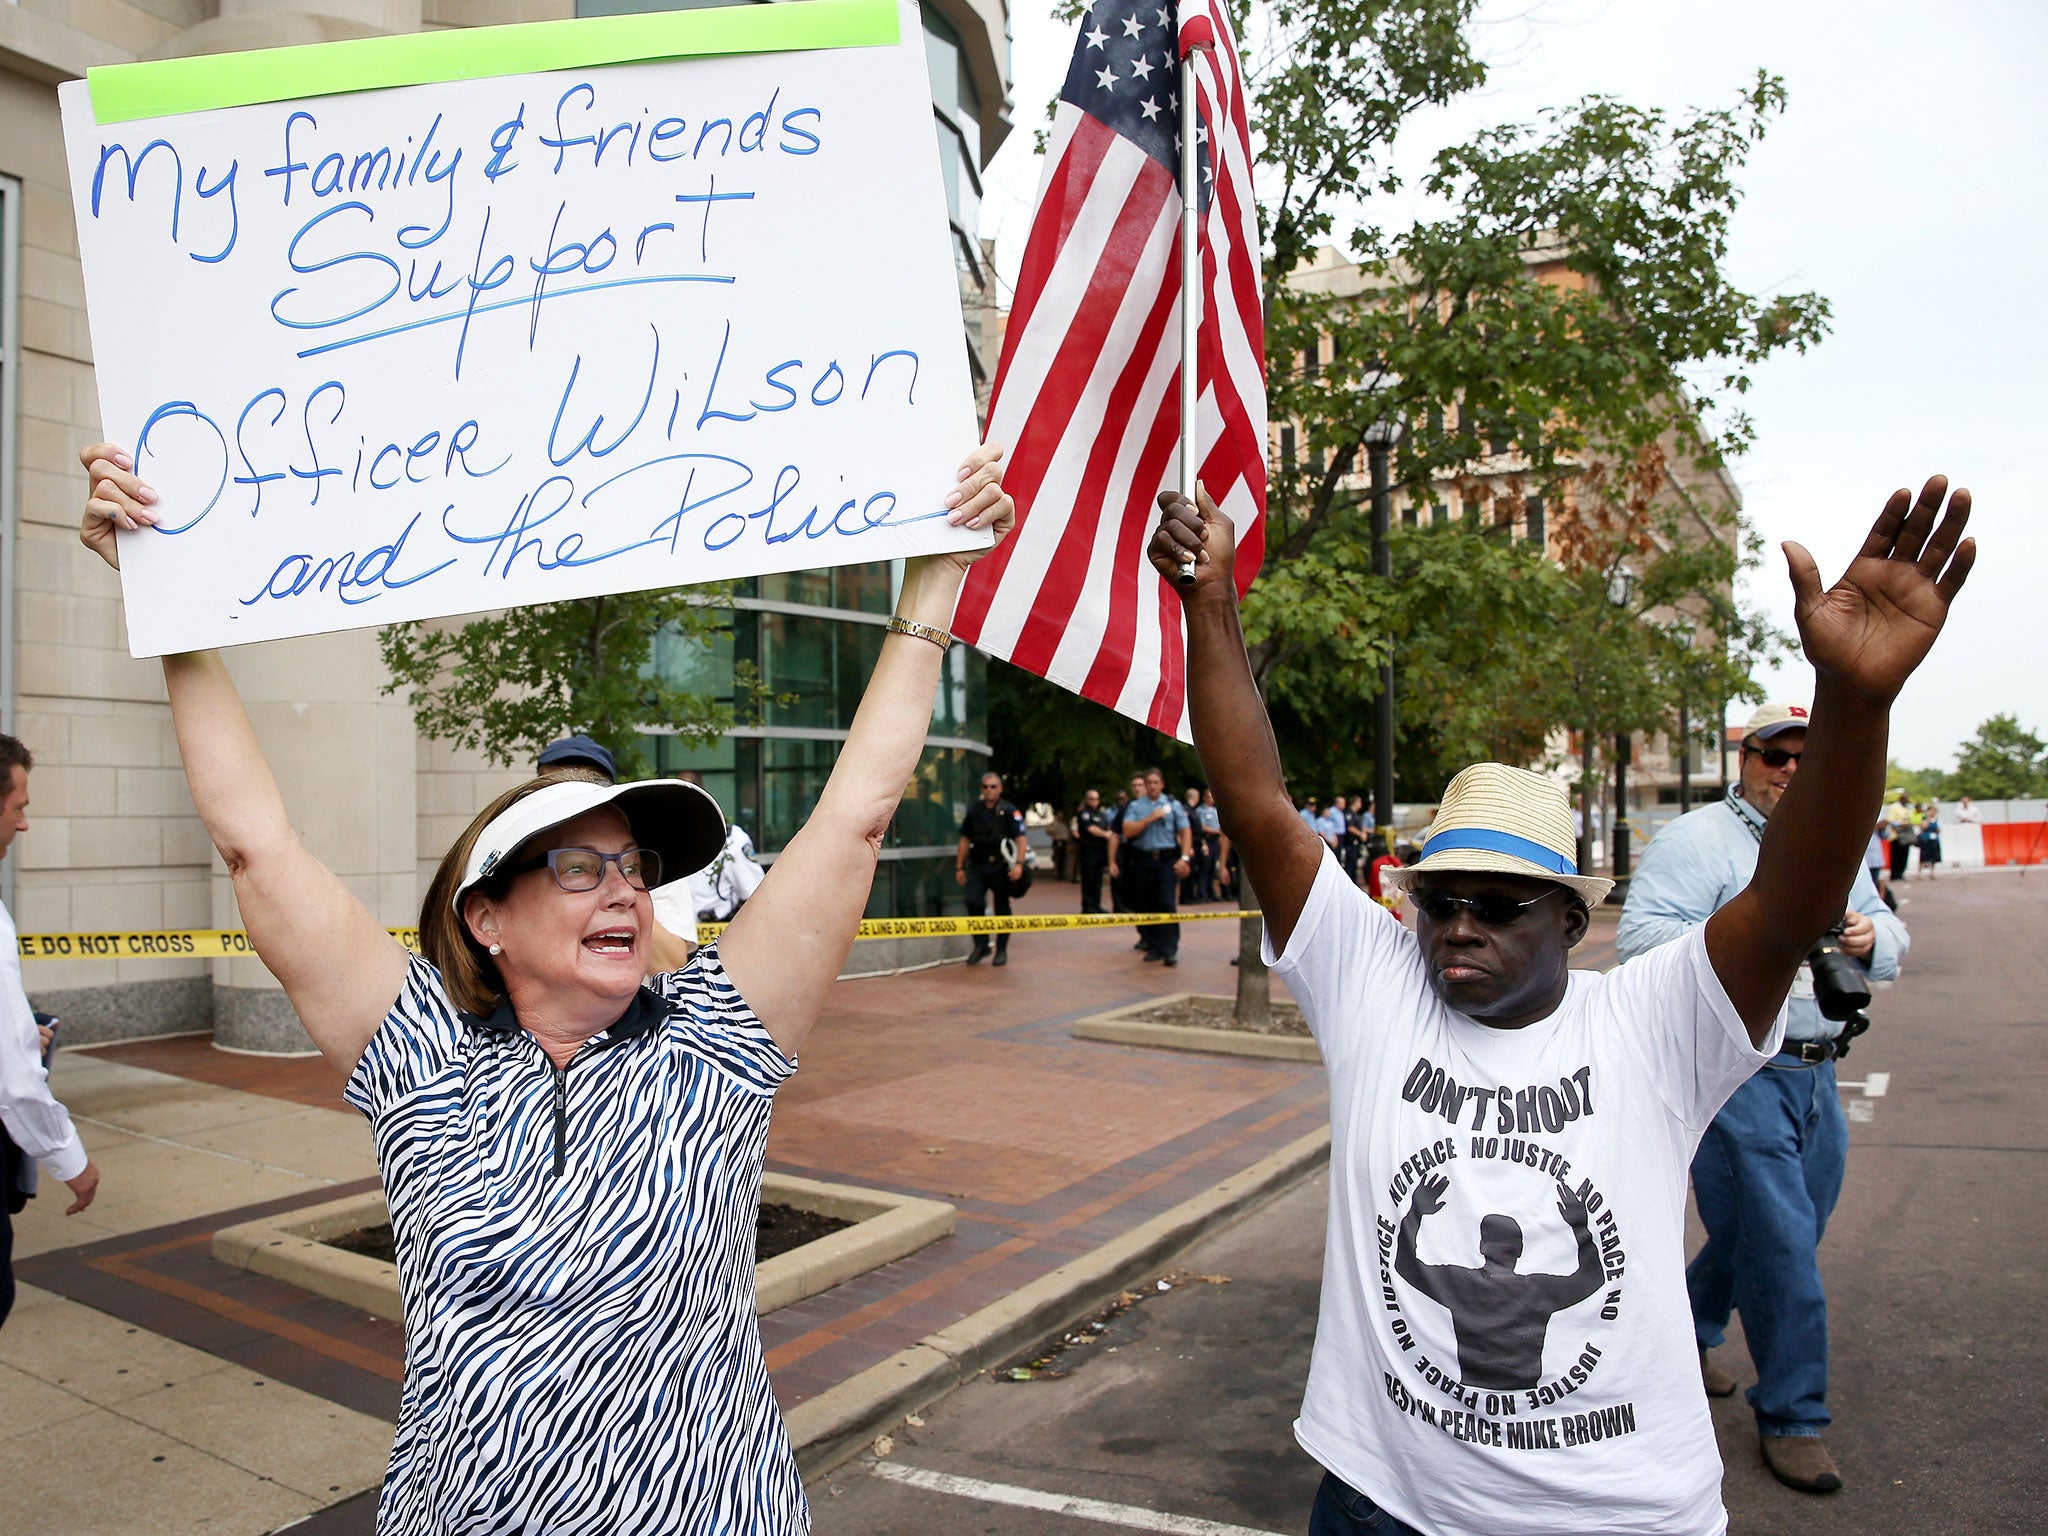 Patty Canter (L) holds a sign reading, " My Family & Friends Support Officer Wilson and the Police"